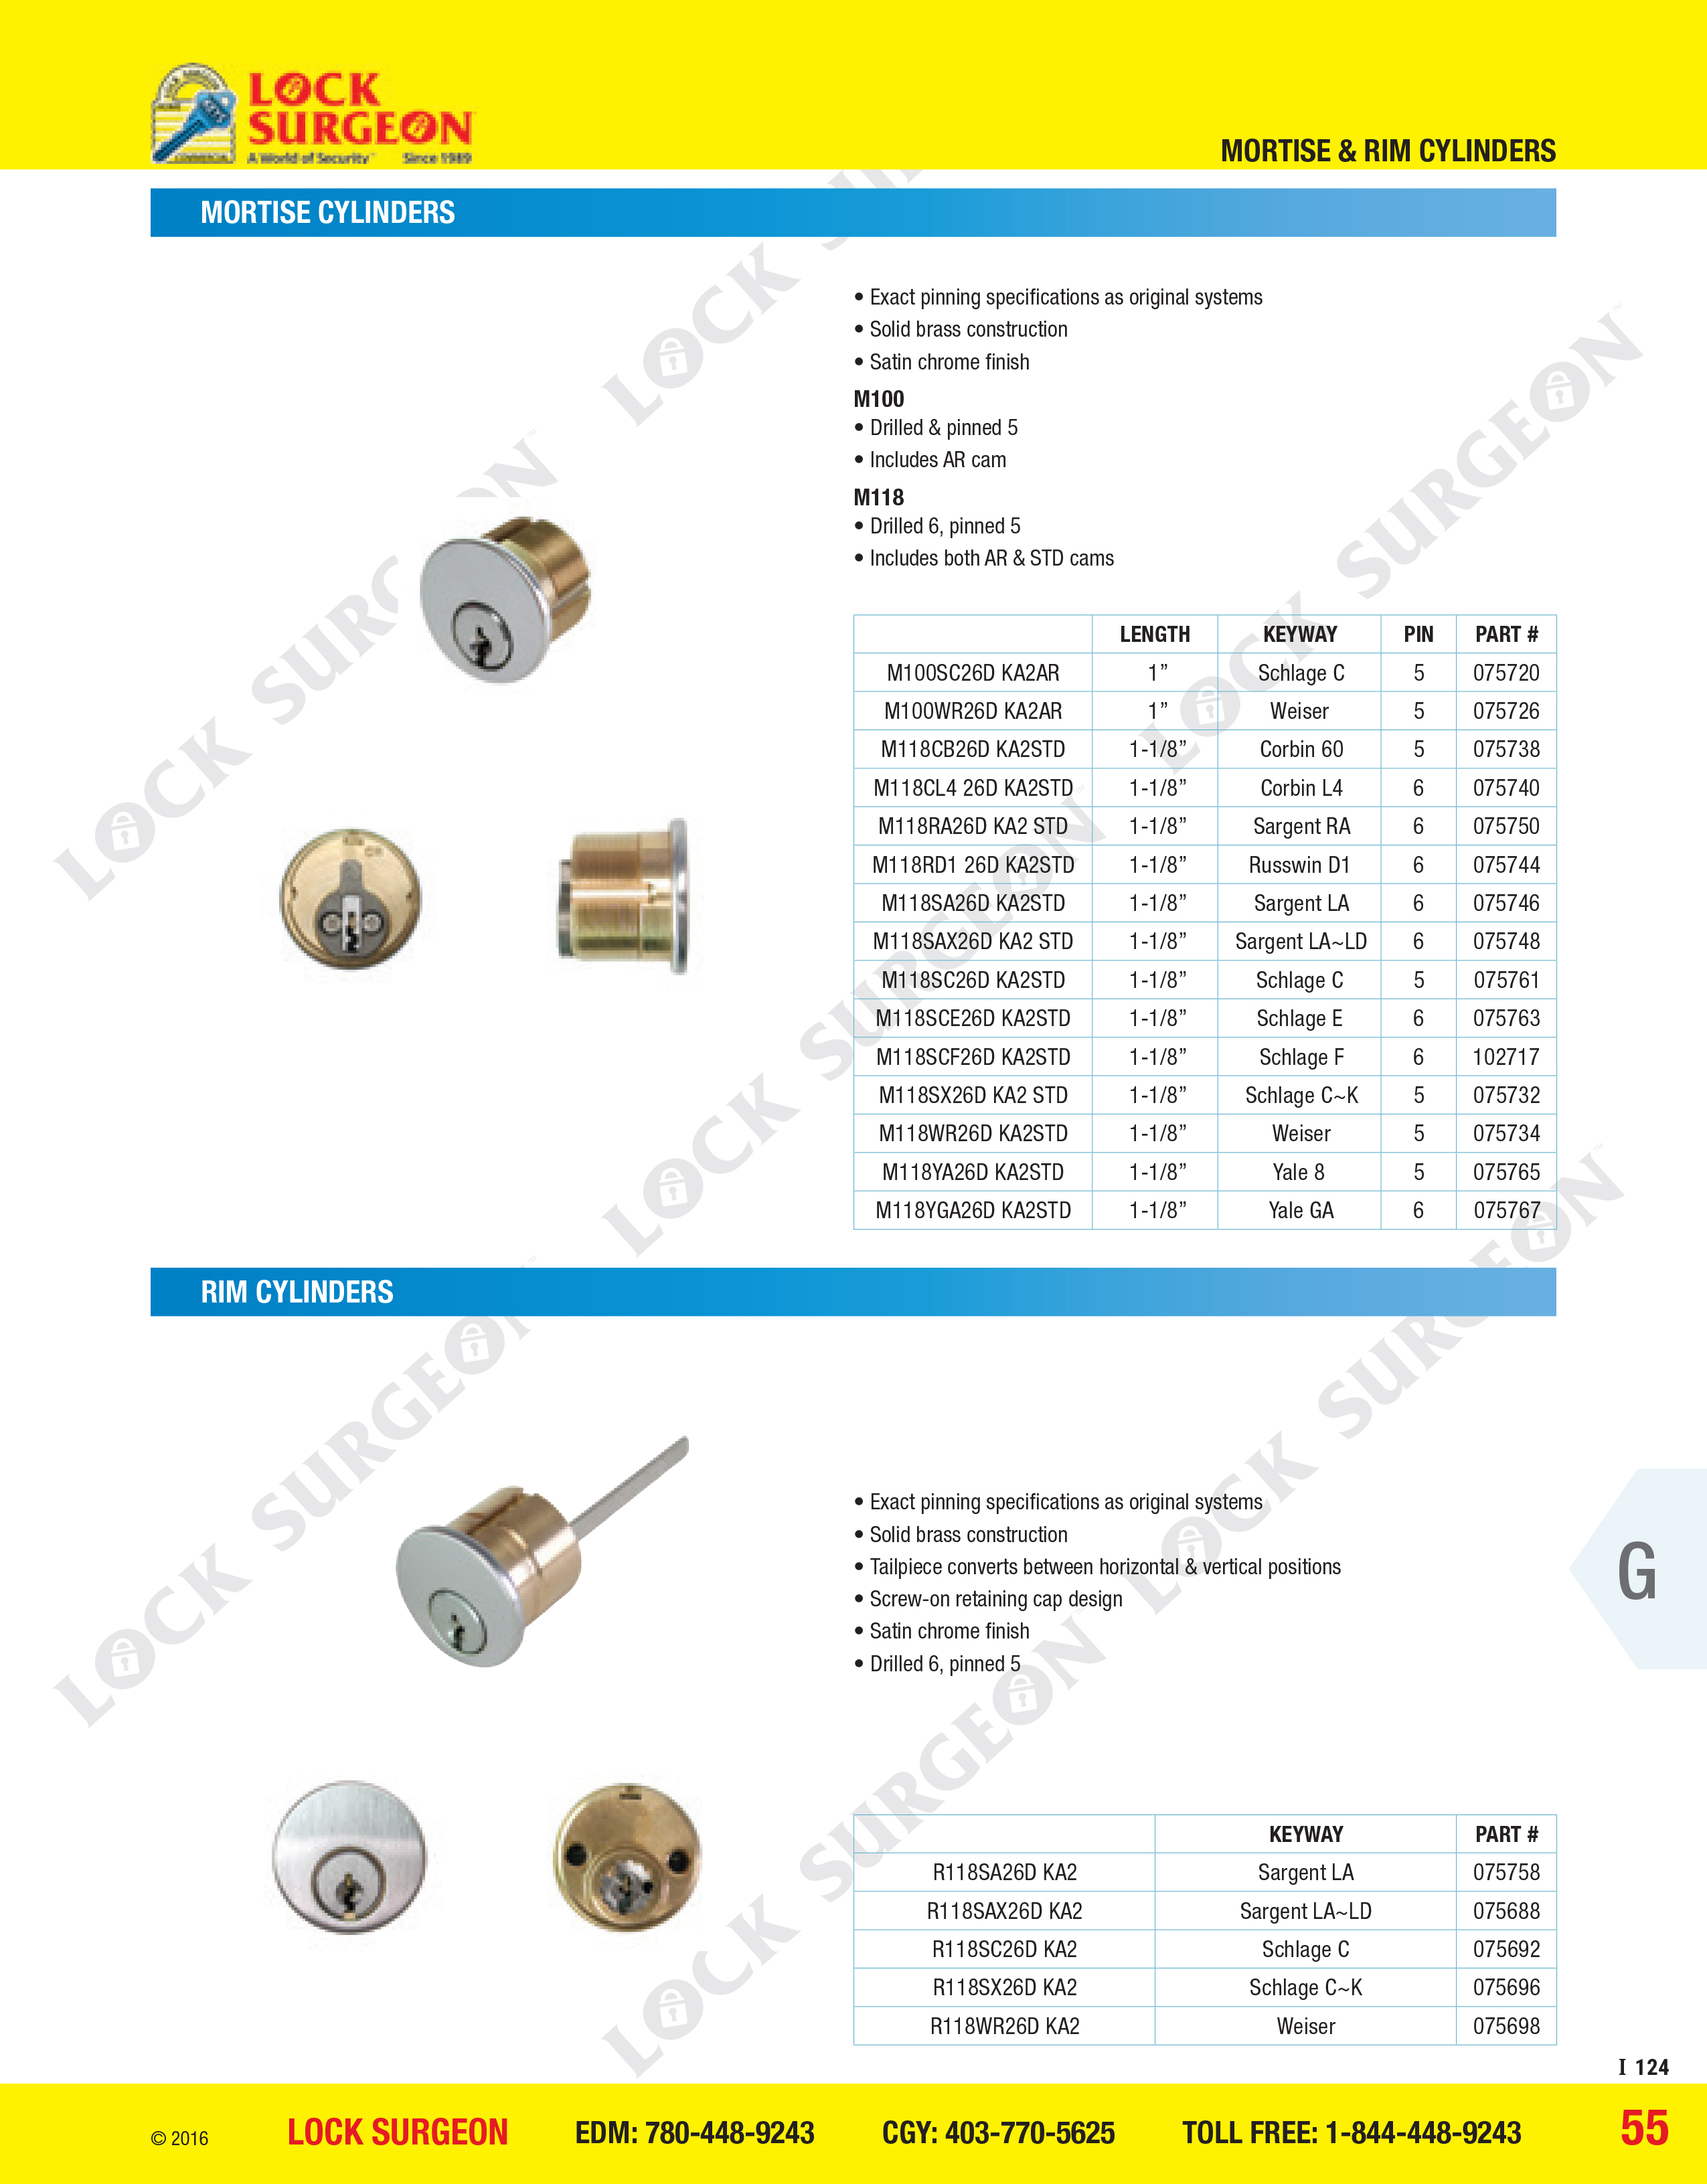 GMS mortise & rim cylinders exact pinning as original systems sold at Lock Surgeon Edmonton South.